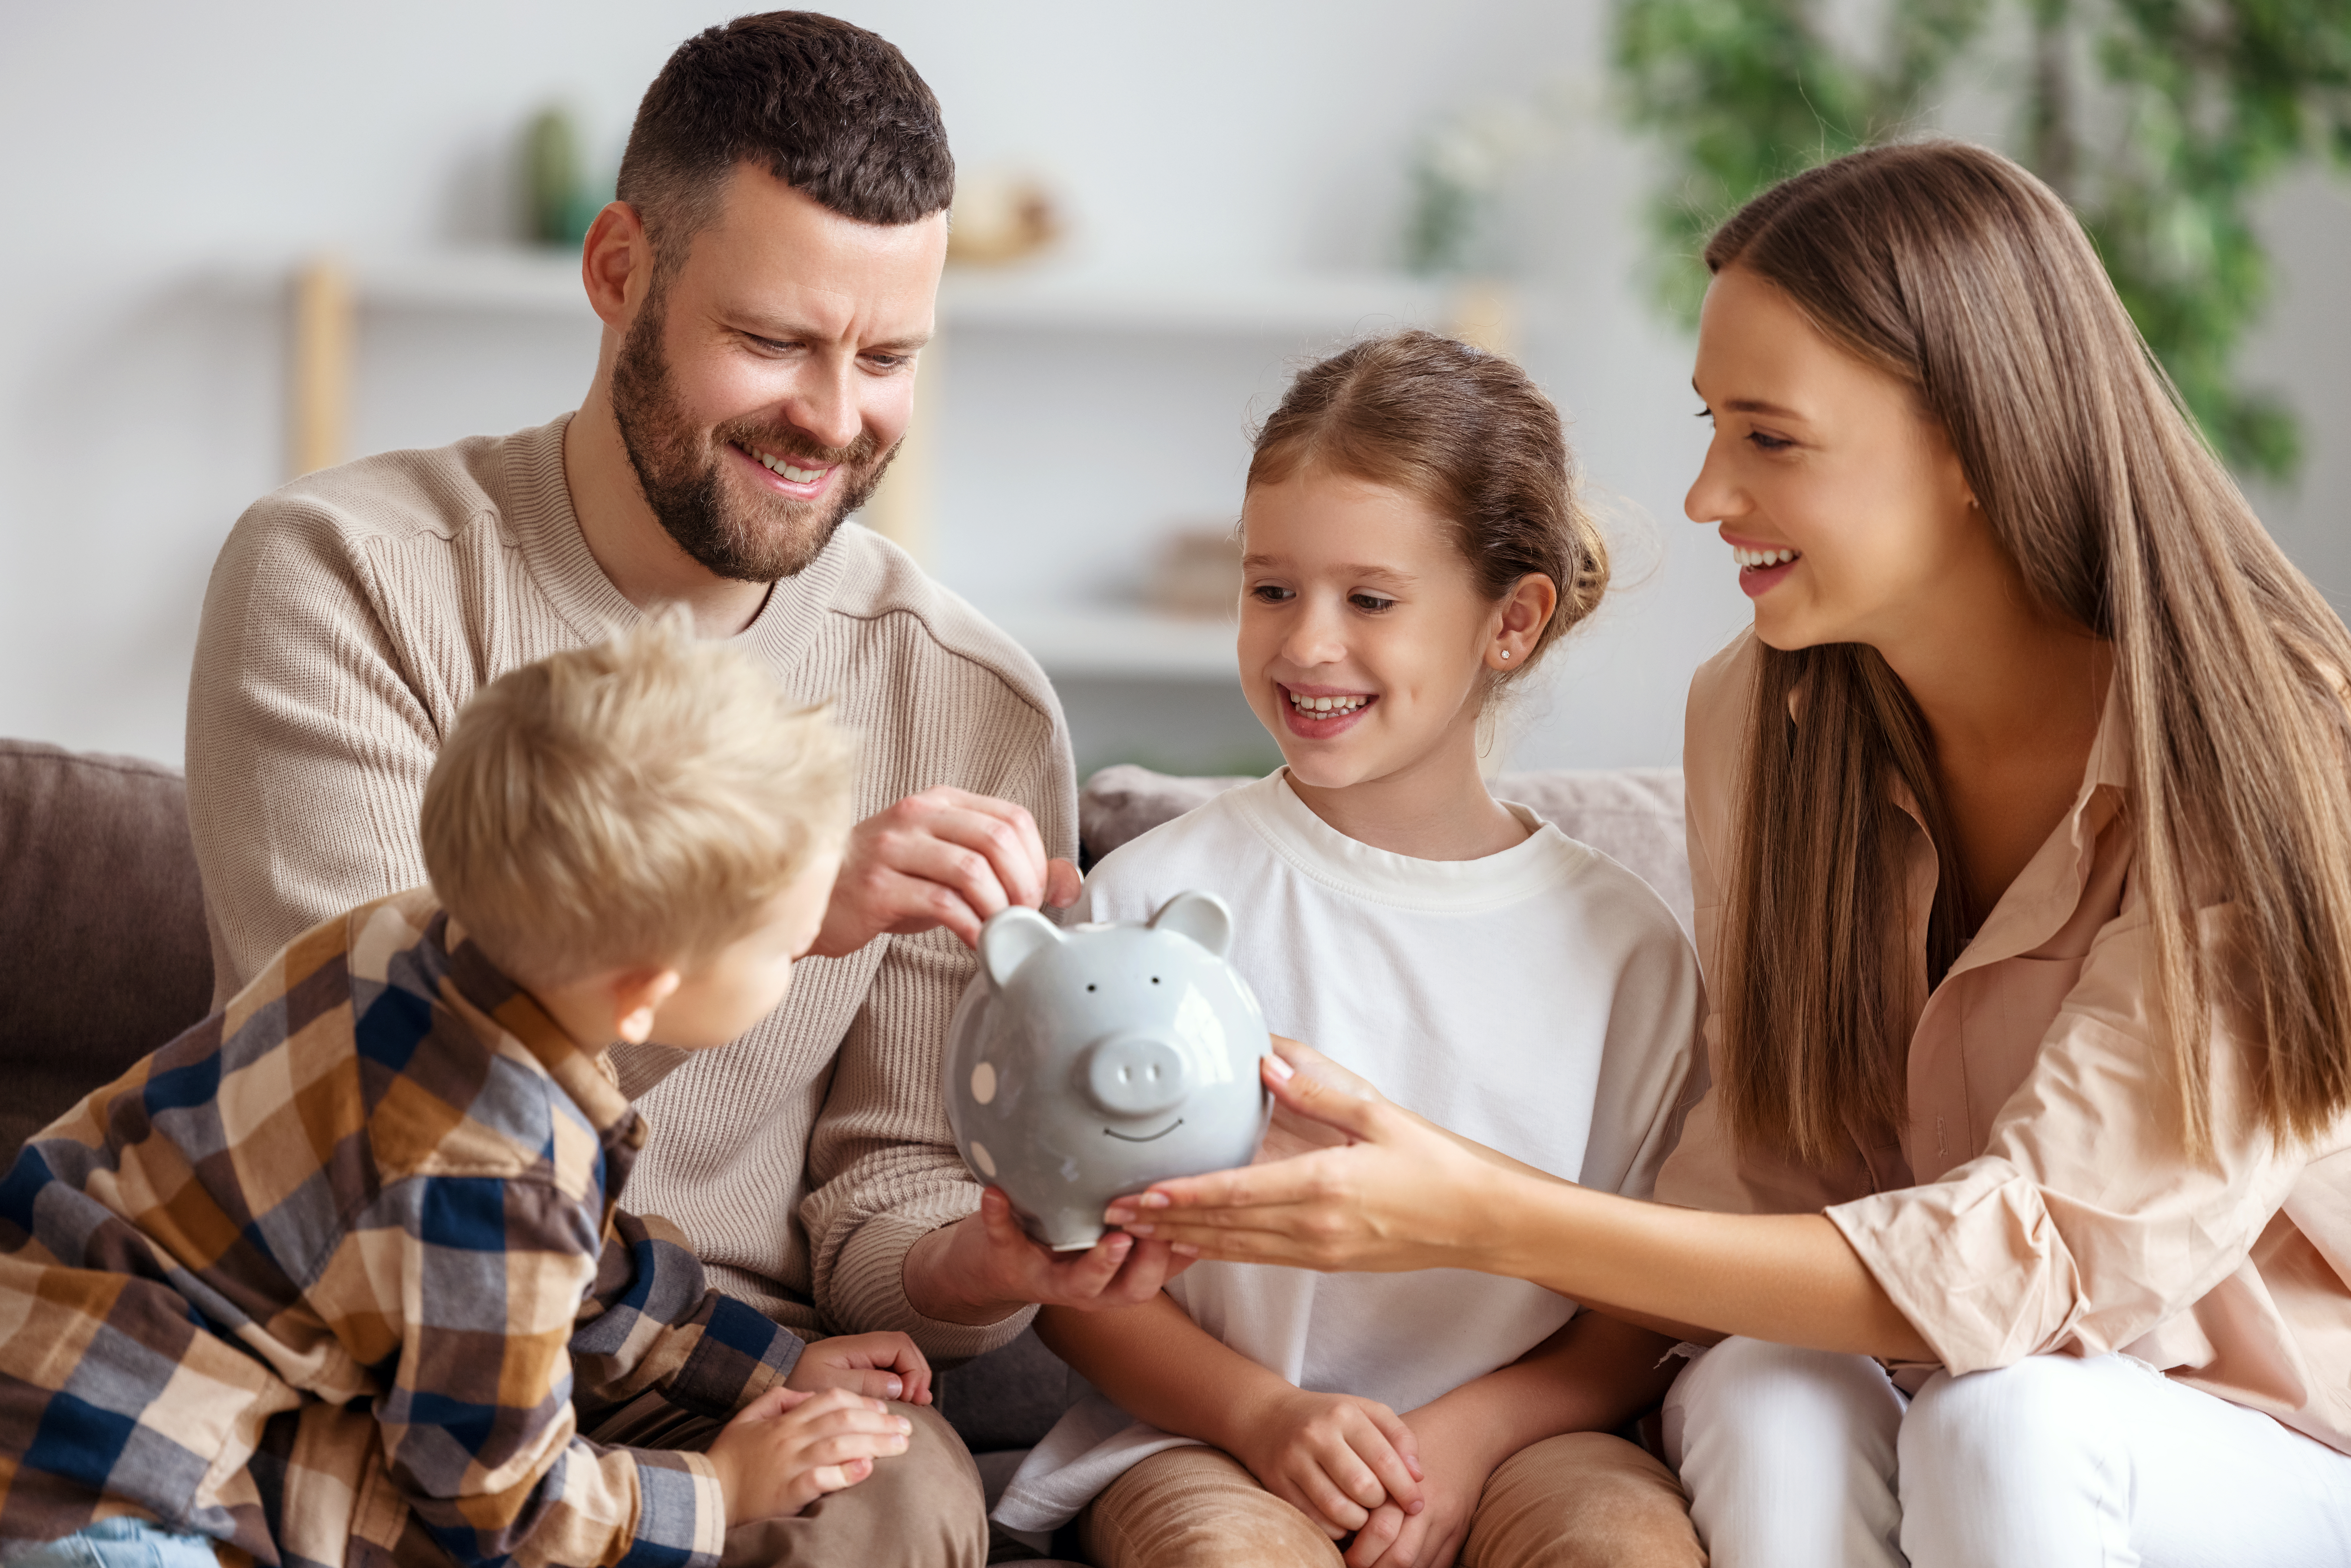 Parents putting coins into piggy bank with daughter and son